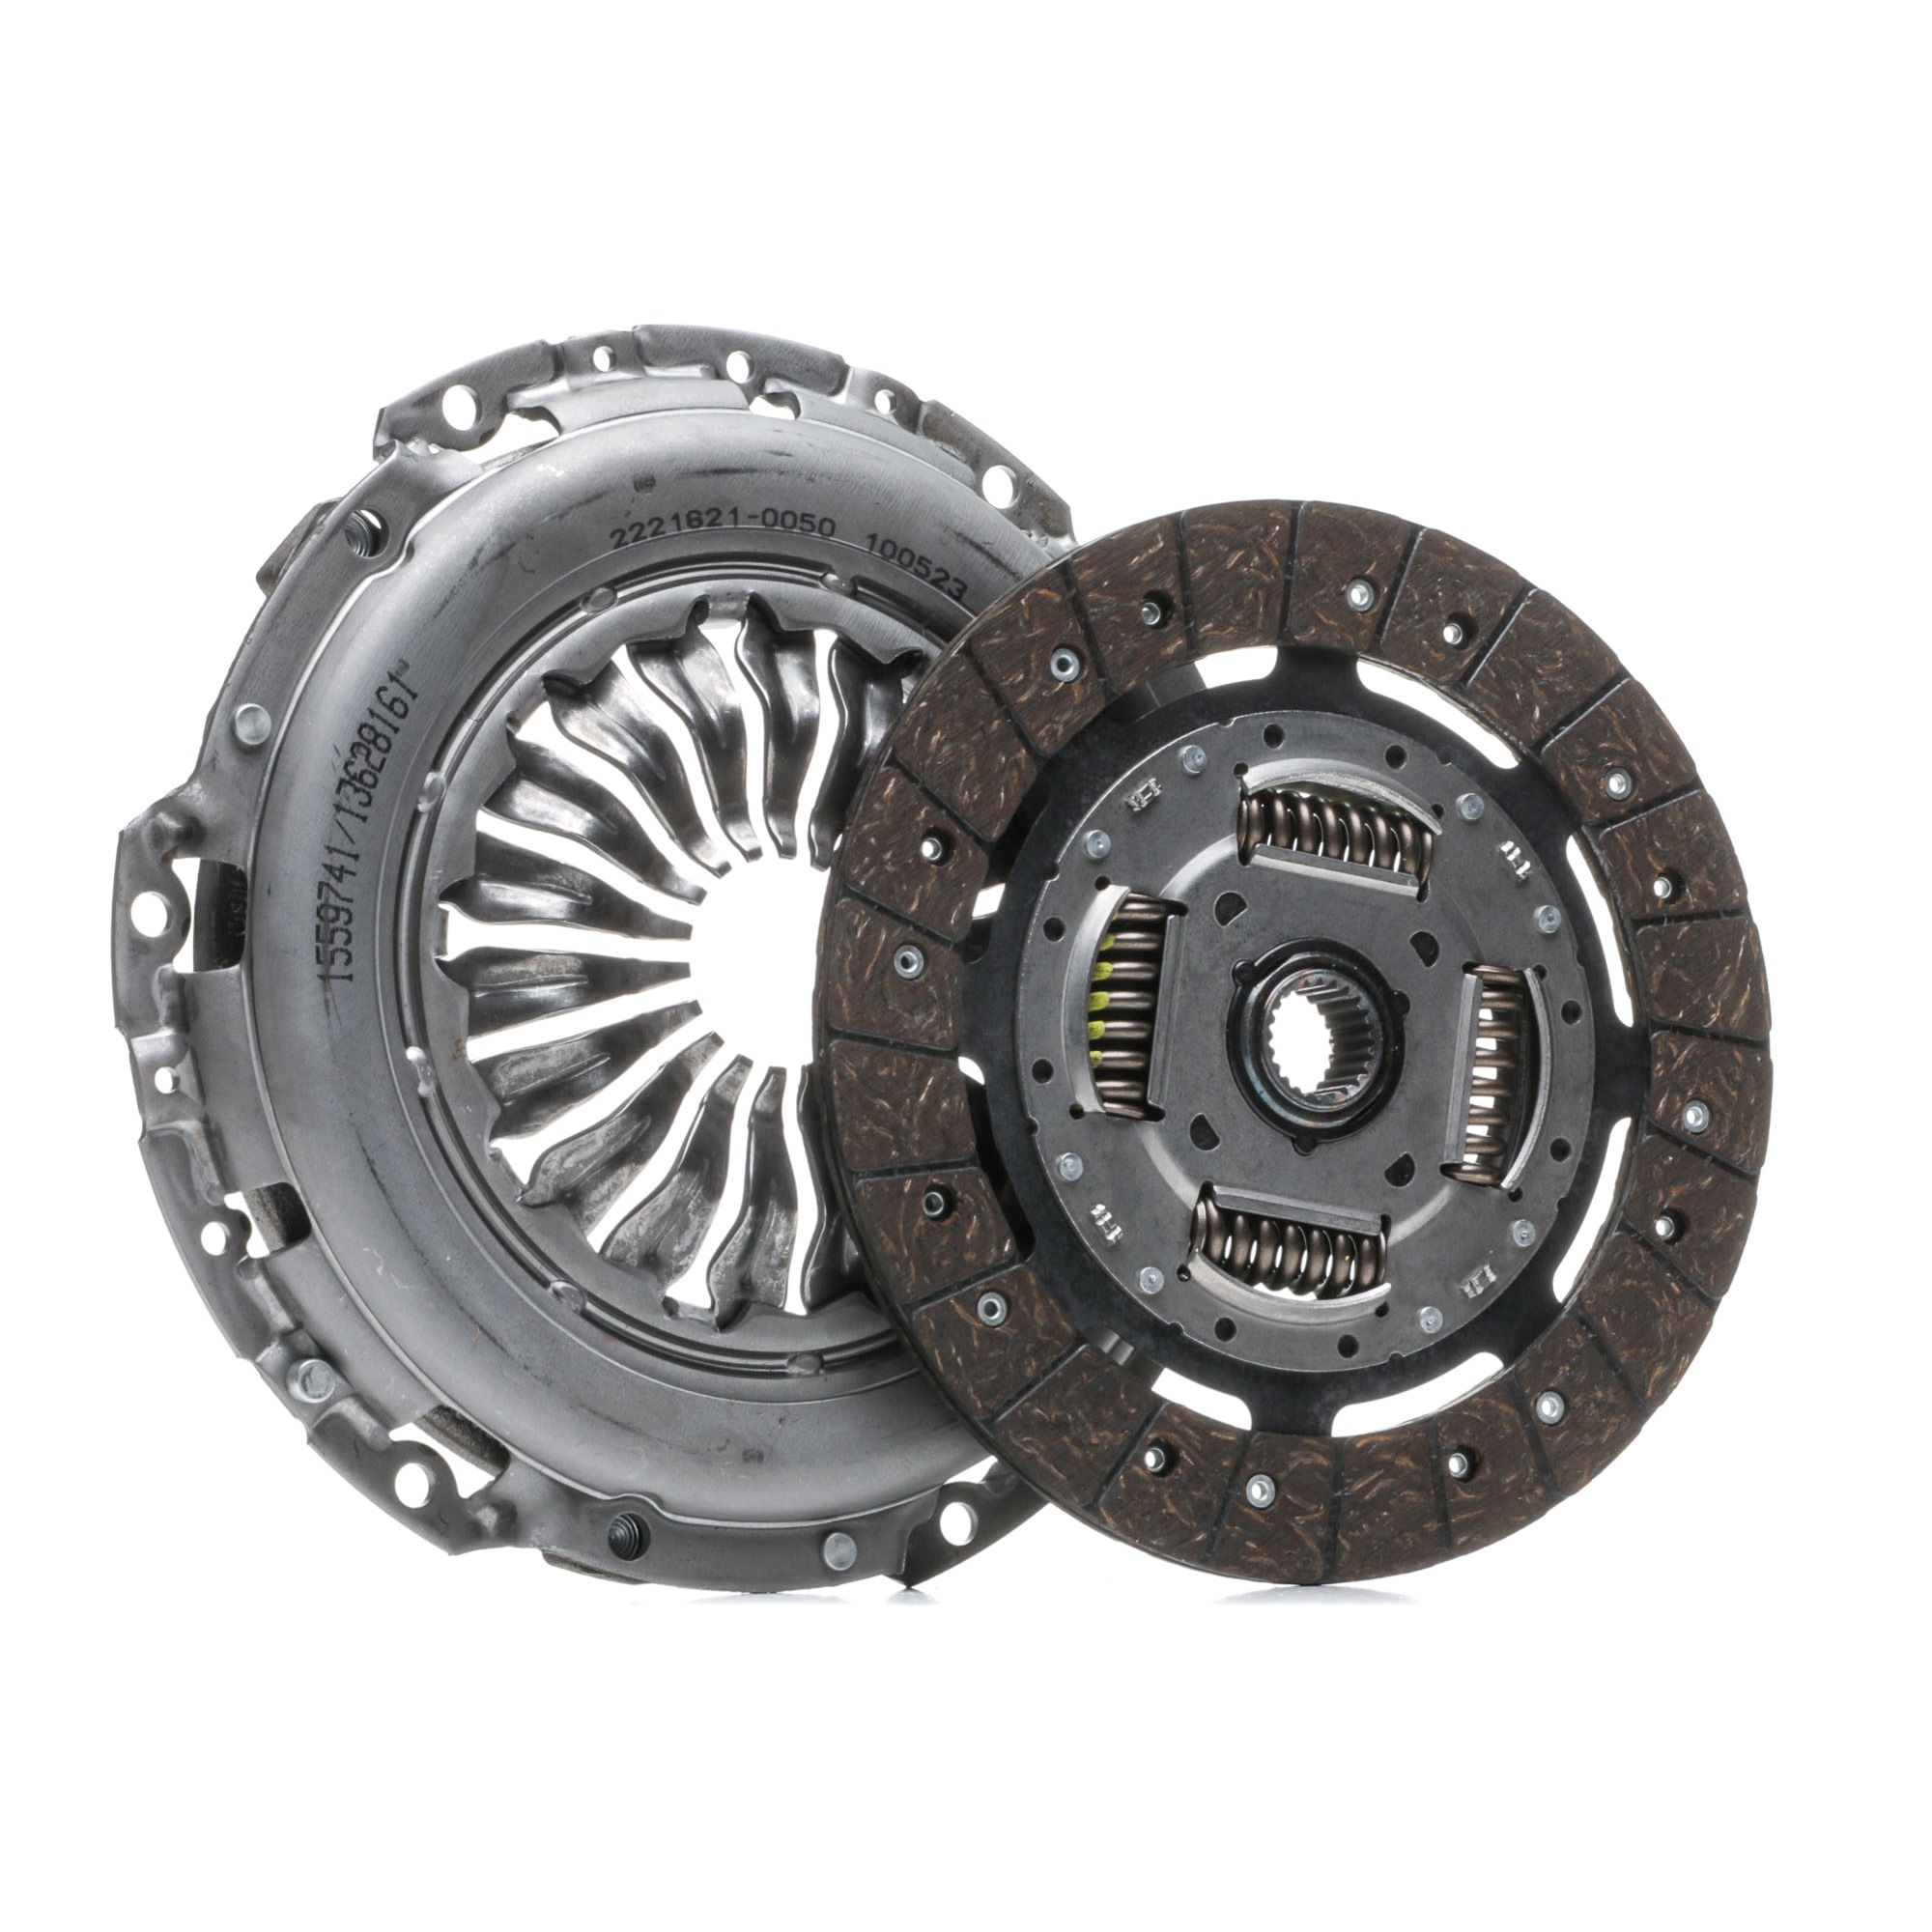 RIDEX 479C0150 Clutch kit with clutch pressure plate, with clutch disc, without clutch release bearing, 240mm